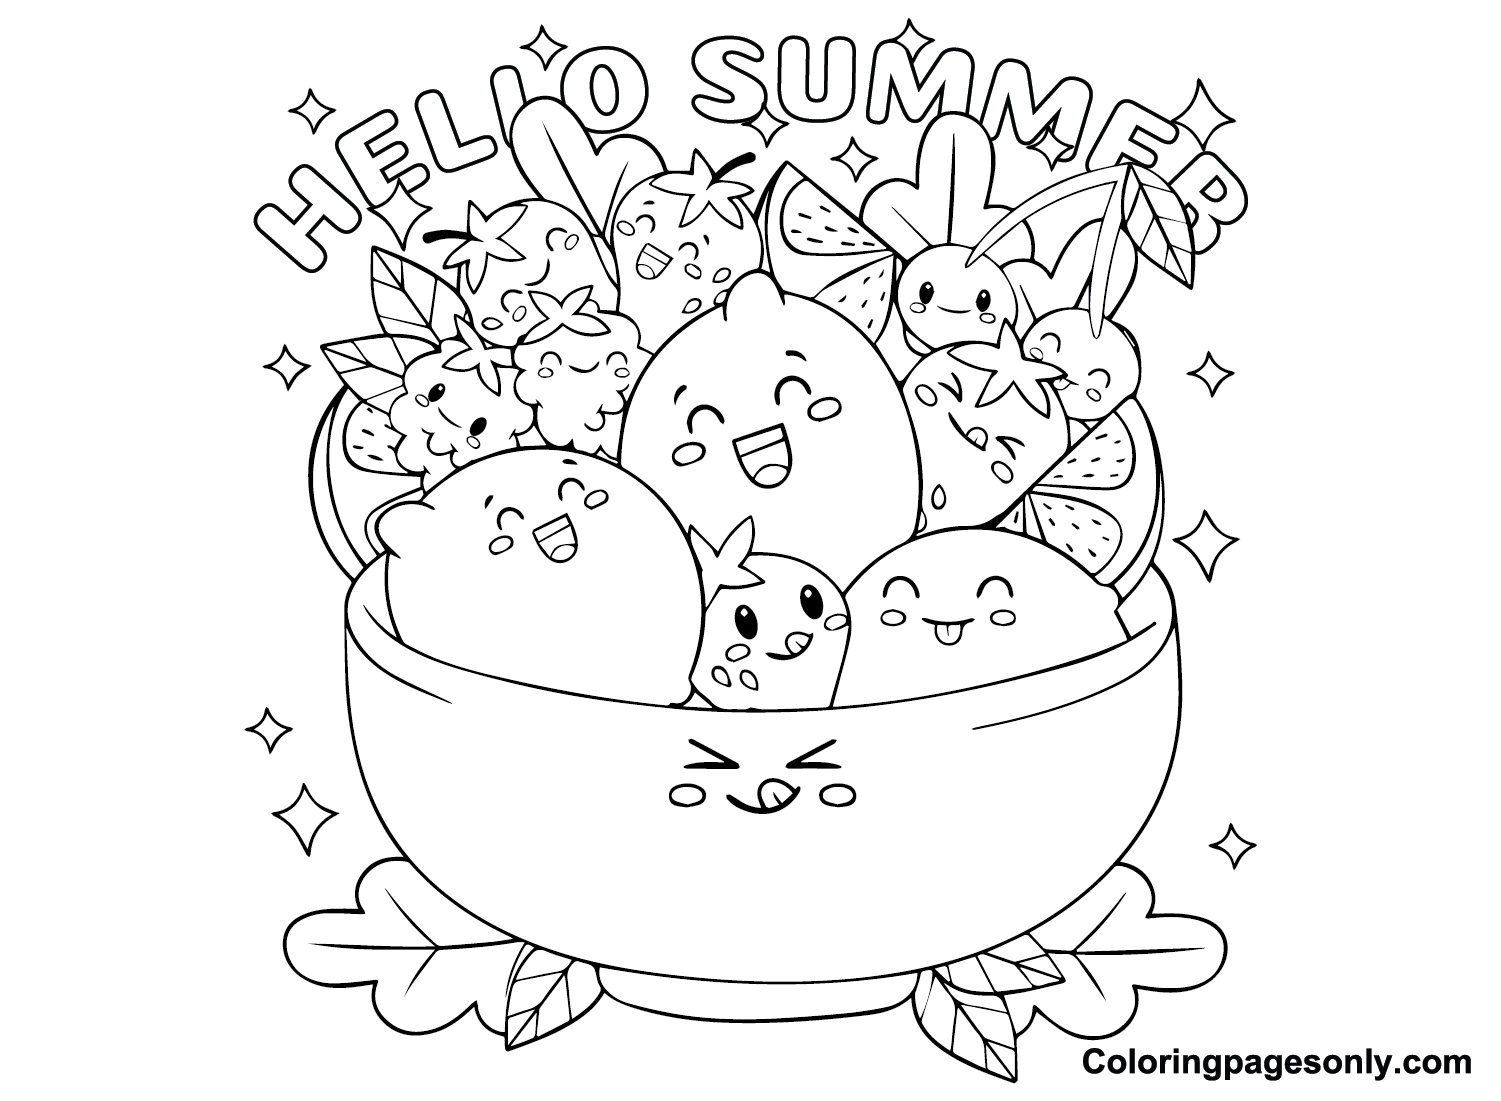 June Summers Coloring Pages